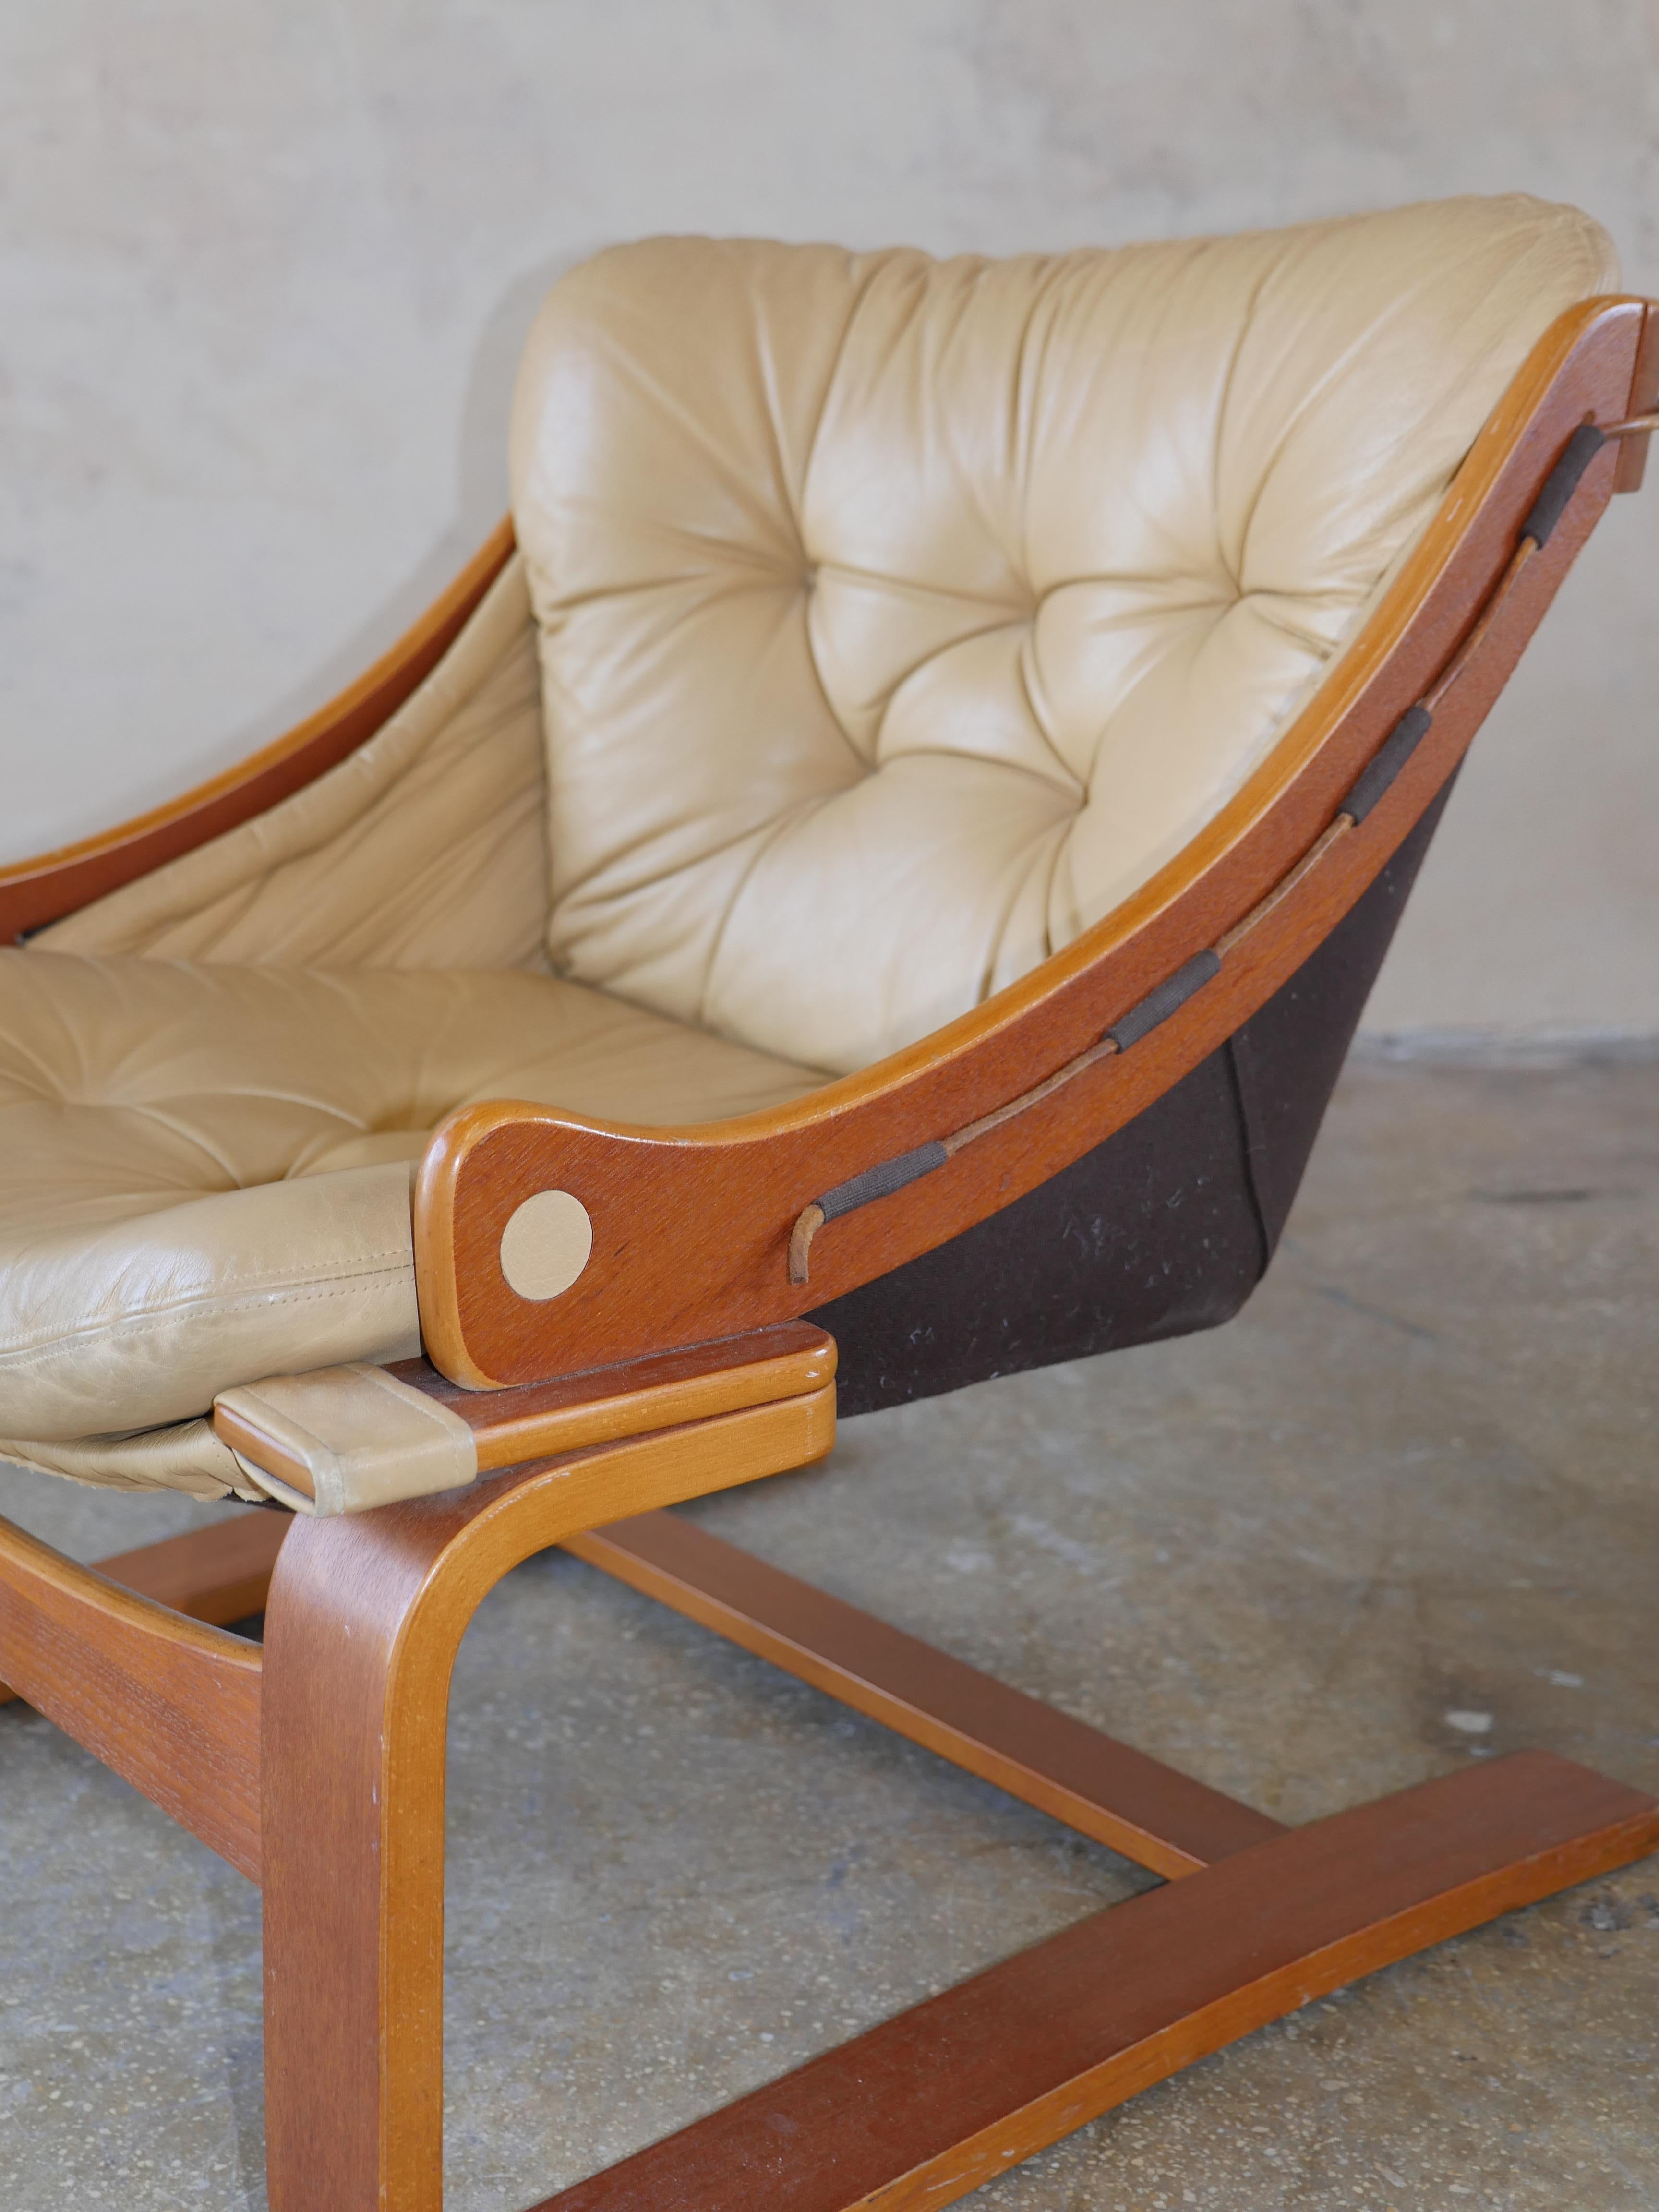 Vintage Scandinavian bentwood cantilevered leather lounge chair, by Ake Fribytter for Nelo Mobel. The bentwood frame is made out of stained plywood, and the leather is a beautiful tan color that has just the right amount of wear to give the chair a